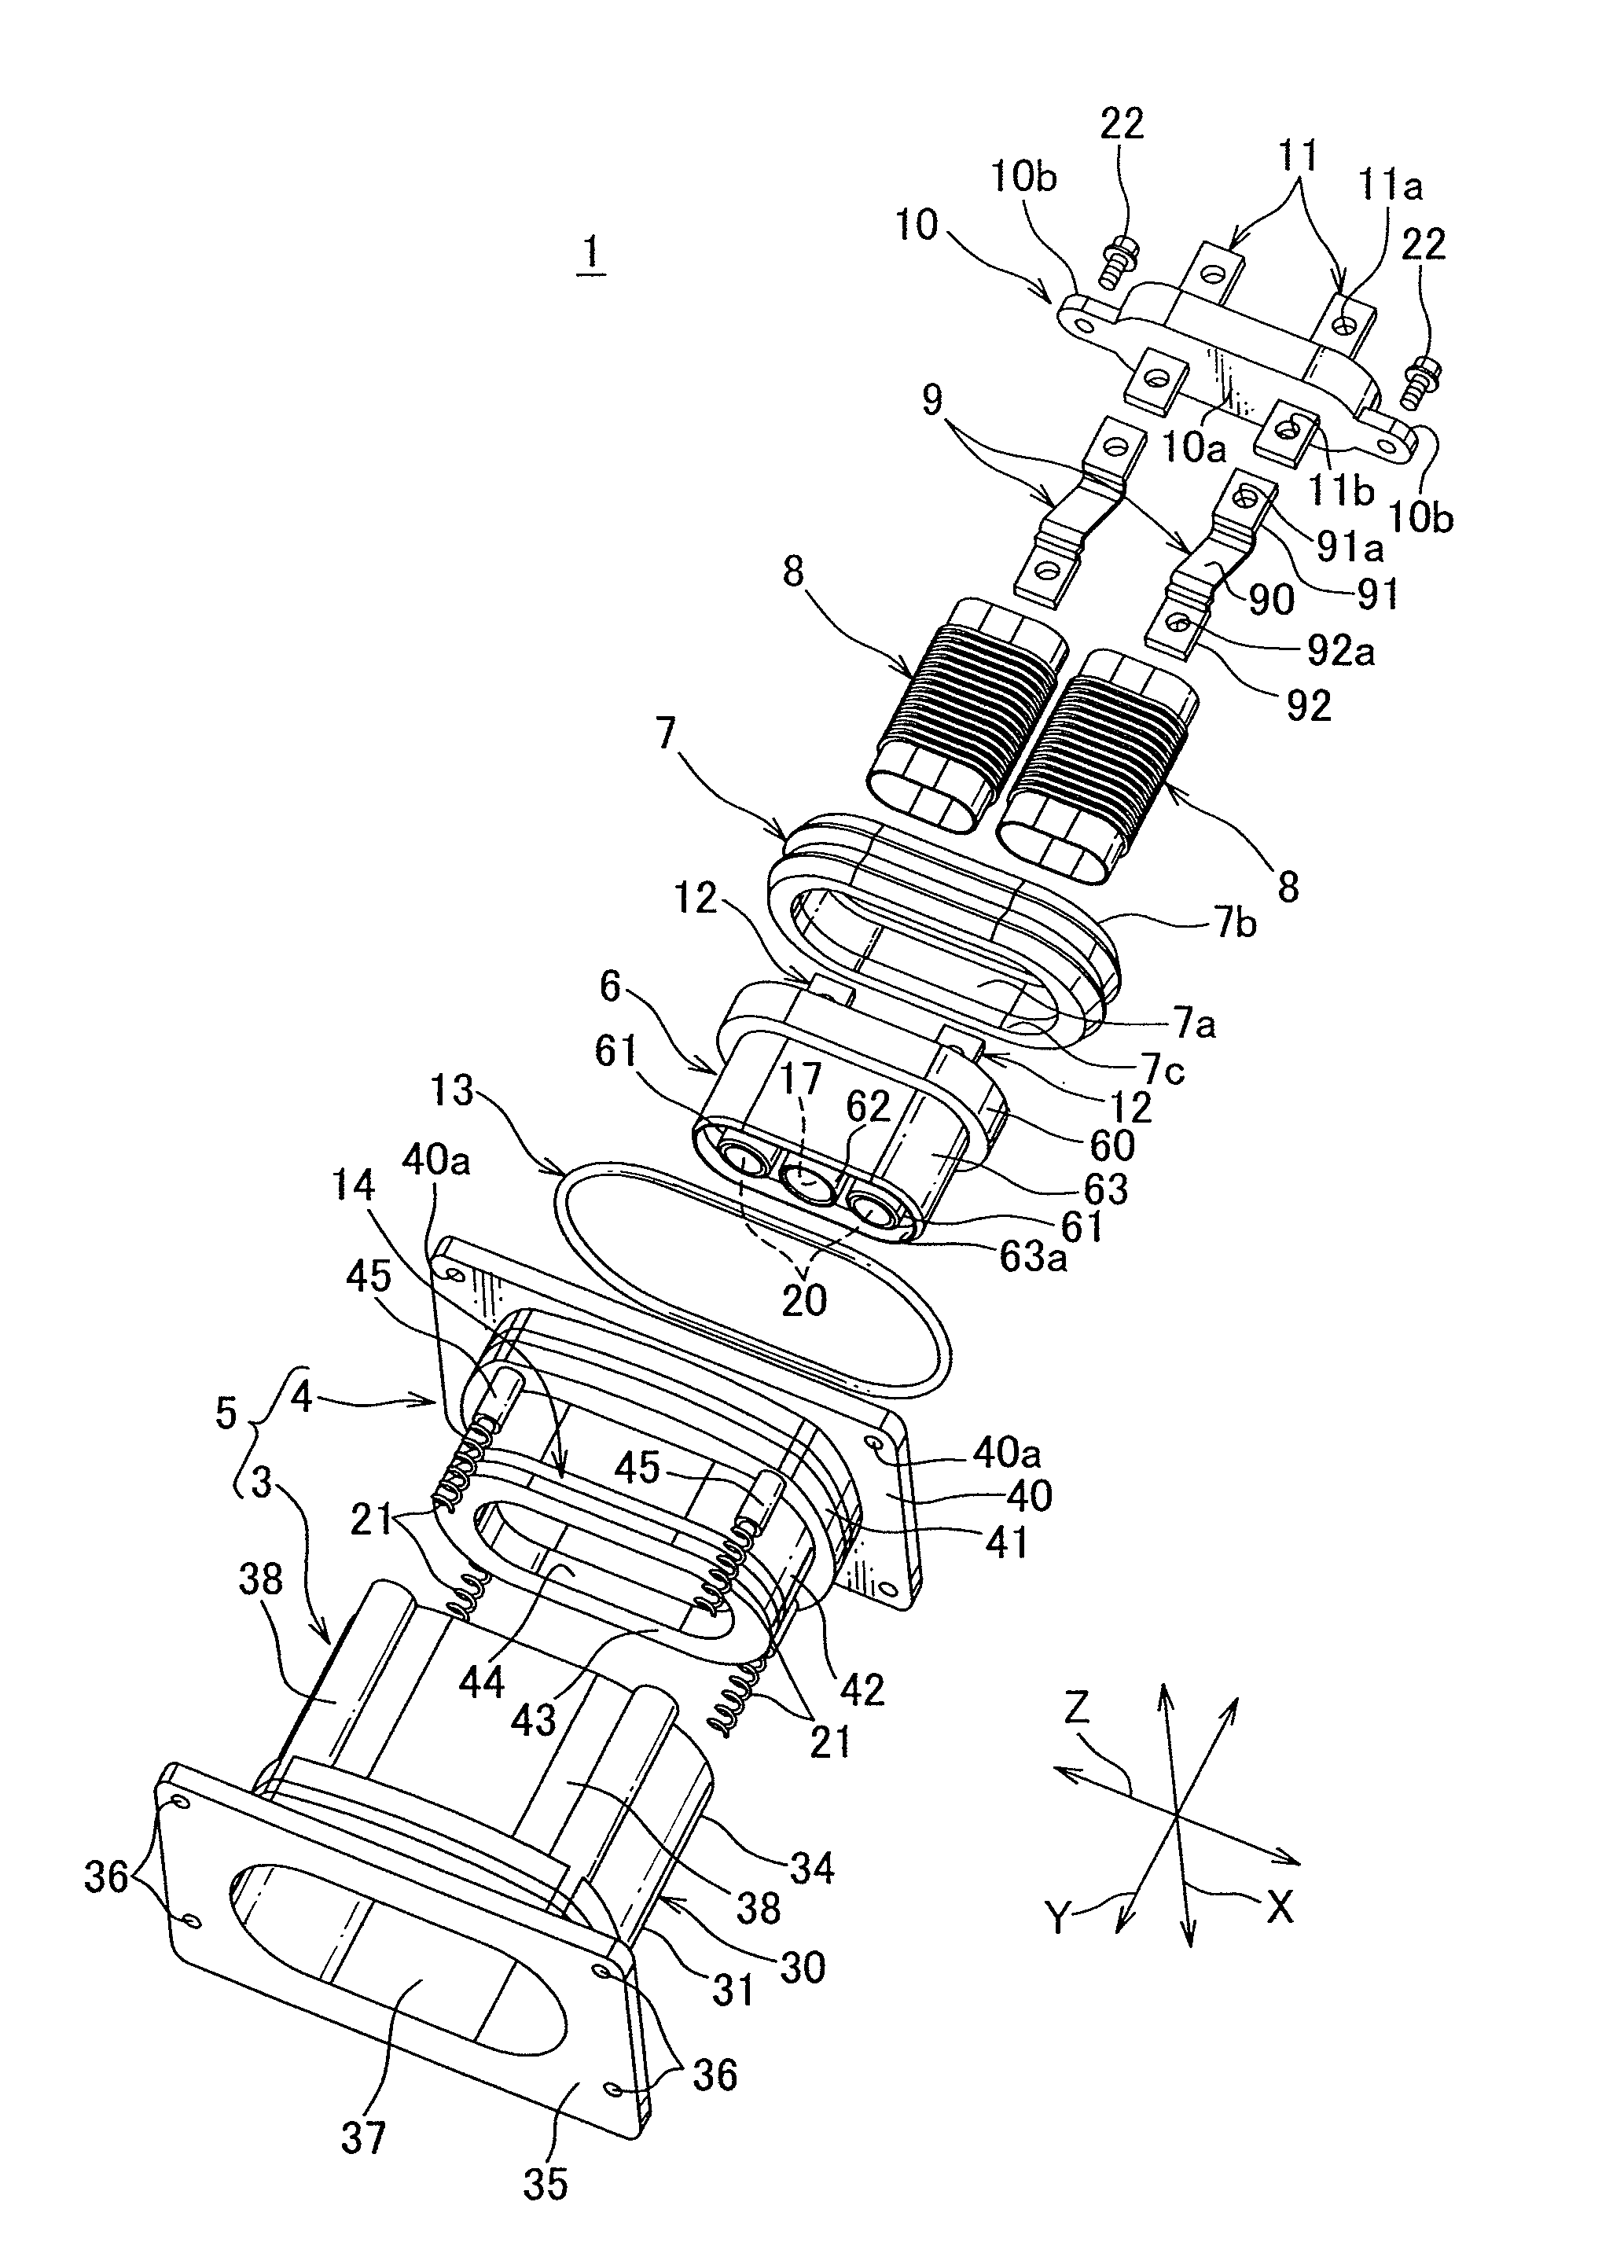 Floating connector with flexible conductive member